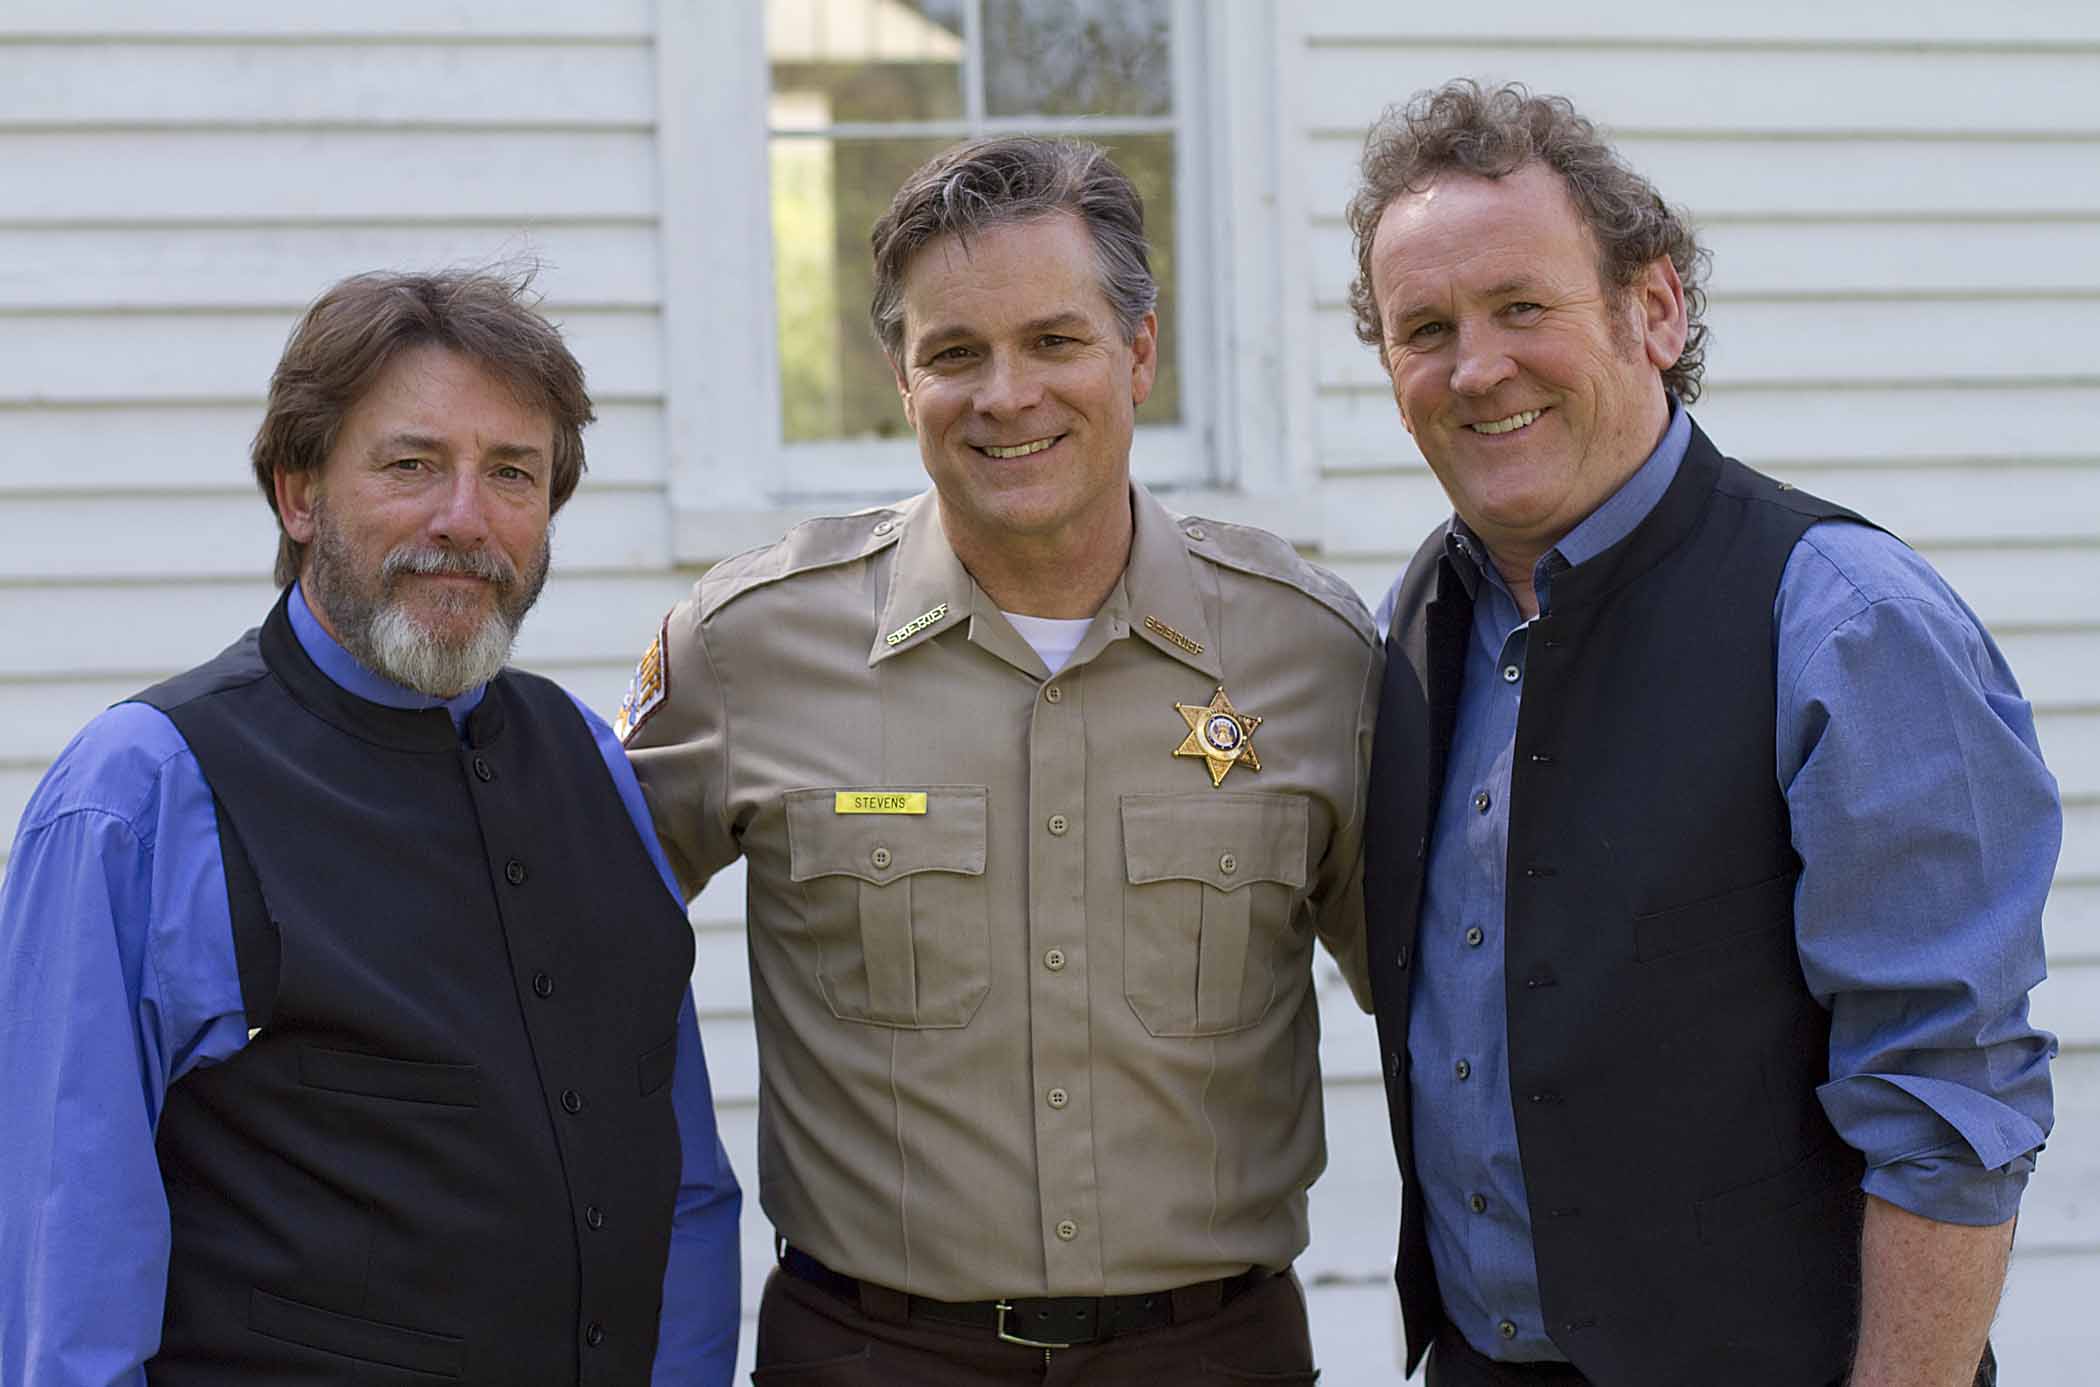 Jim McKenny, Ric & Colm Meaney on the set of 